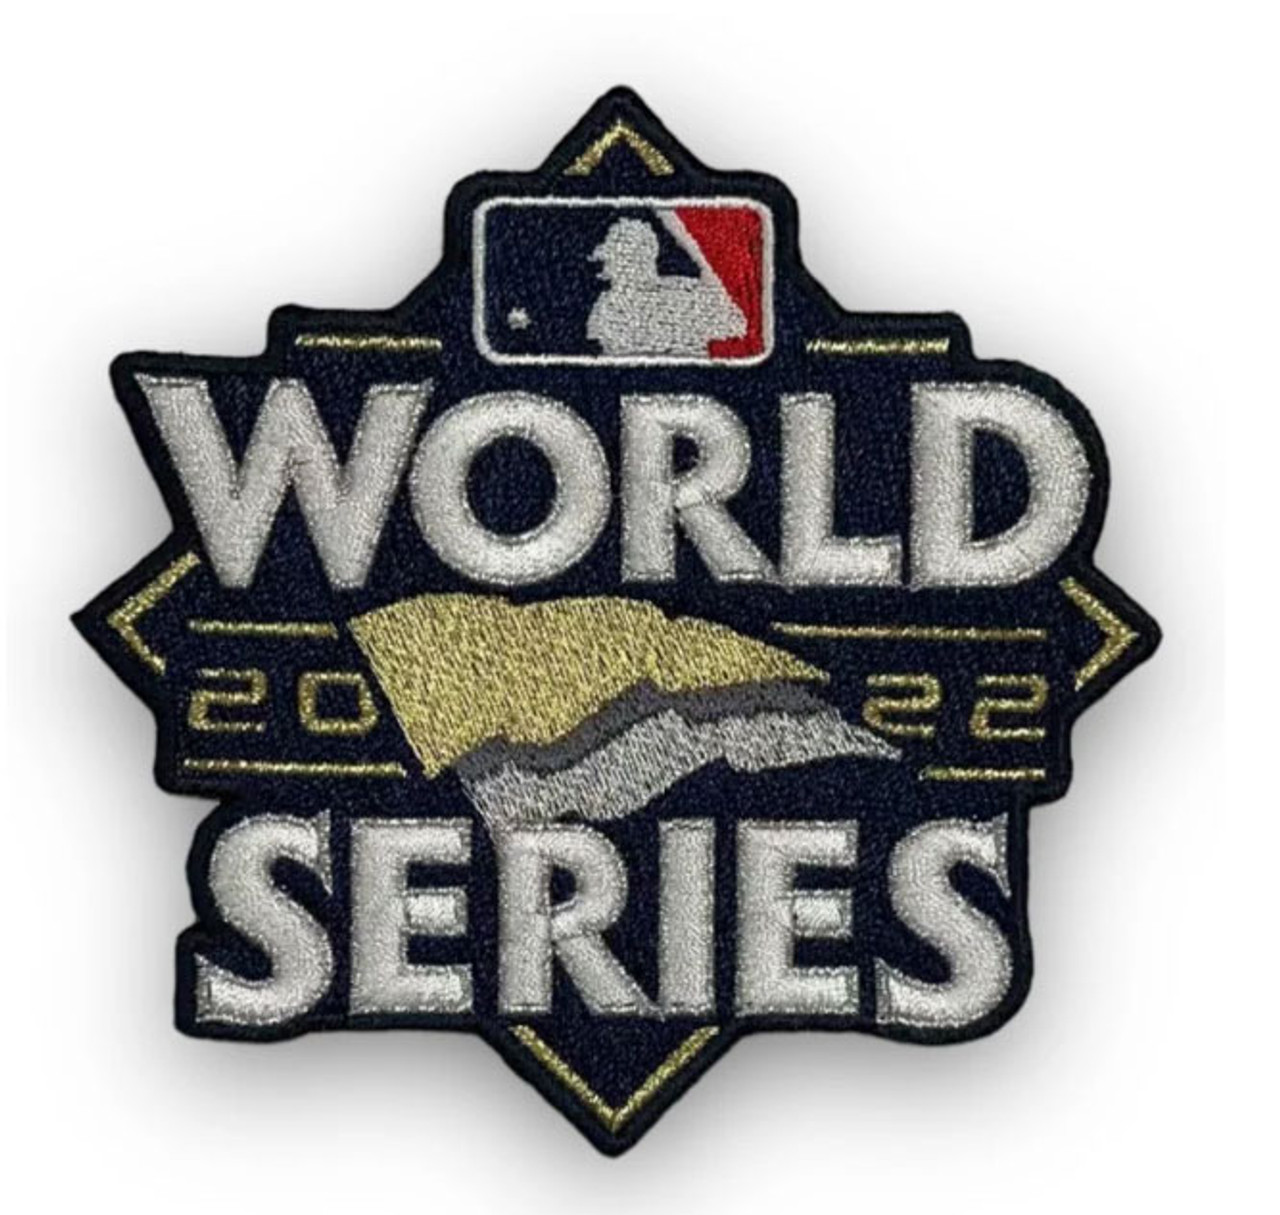 2004 MLB World Series Logo Jersey Patch St. Louis Cardinals vs. Boston Red Sox by Patch Collection